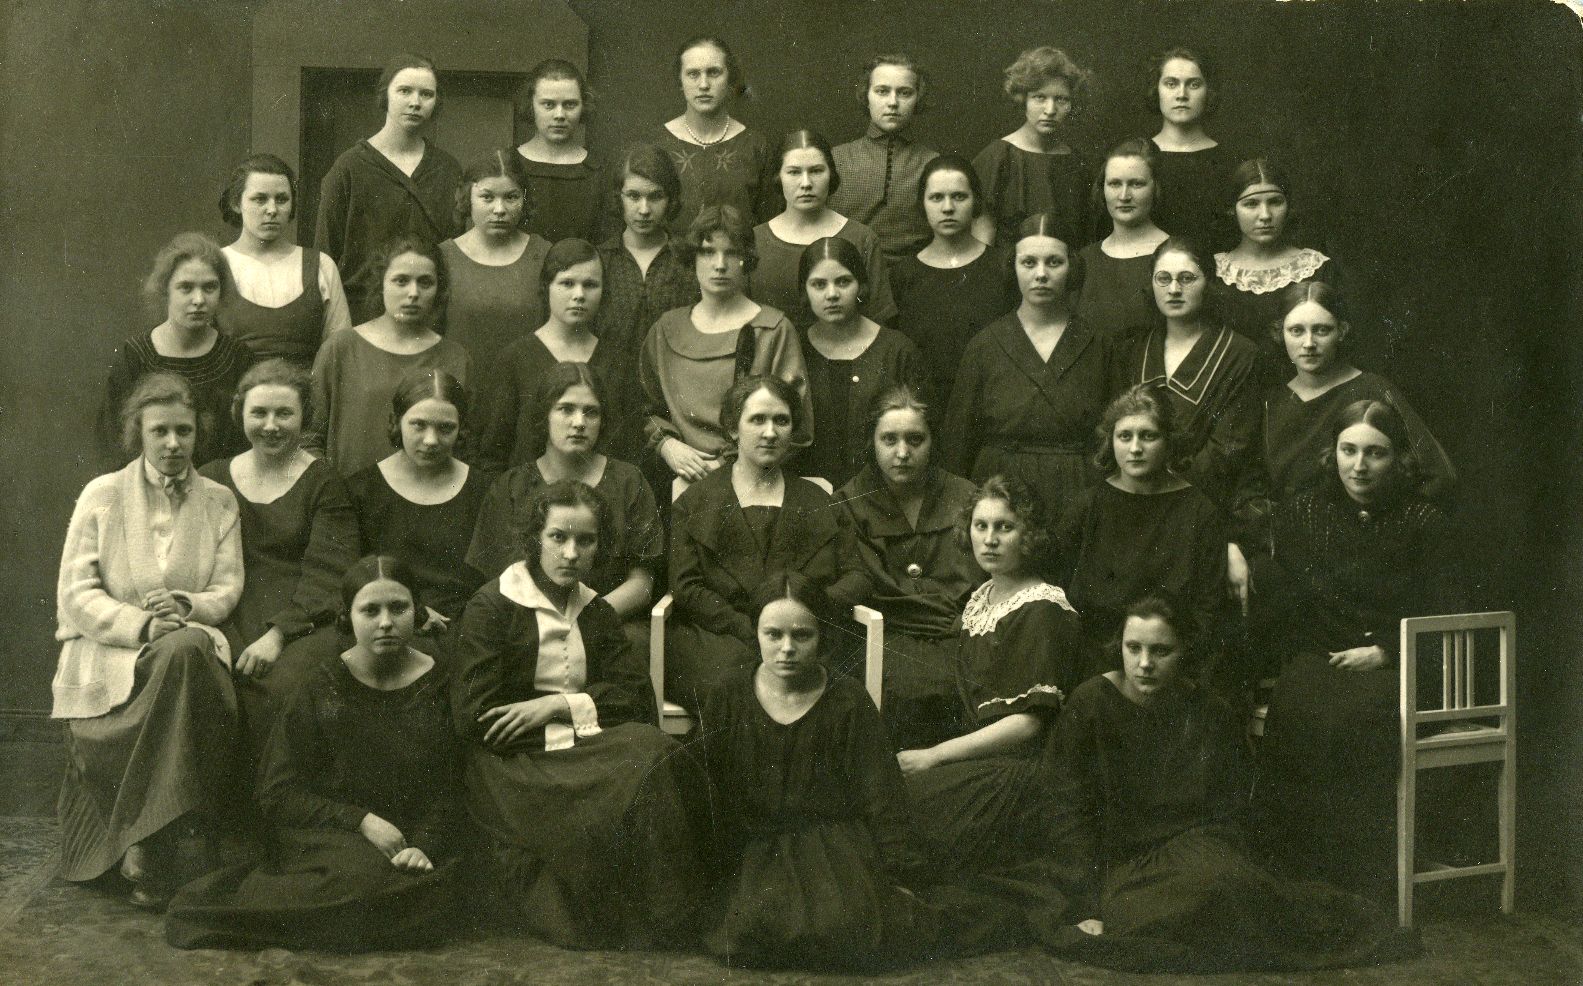 Students of E.N.K.S Gymnasium of Daughters - Class IXa 1923/24